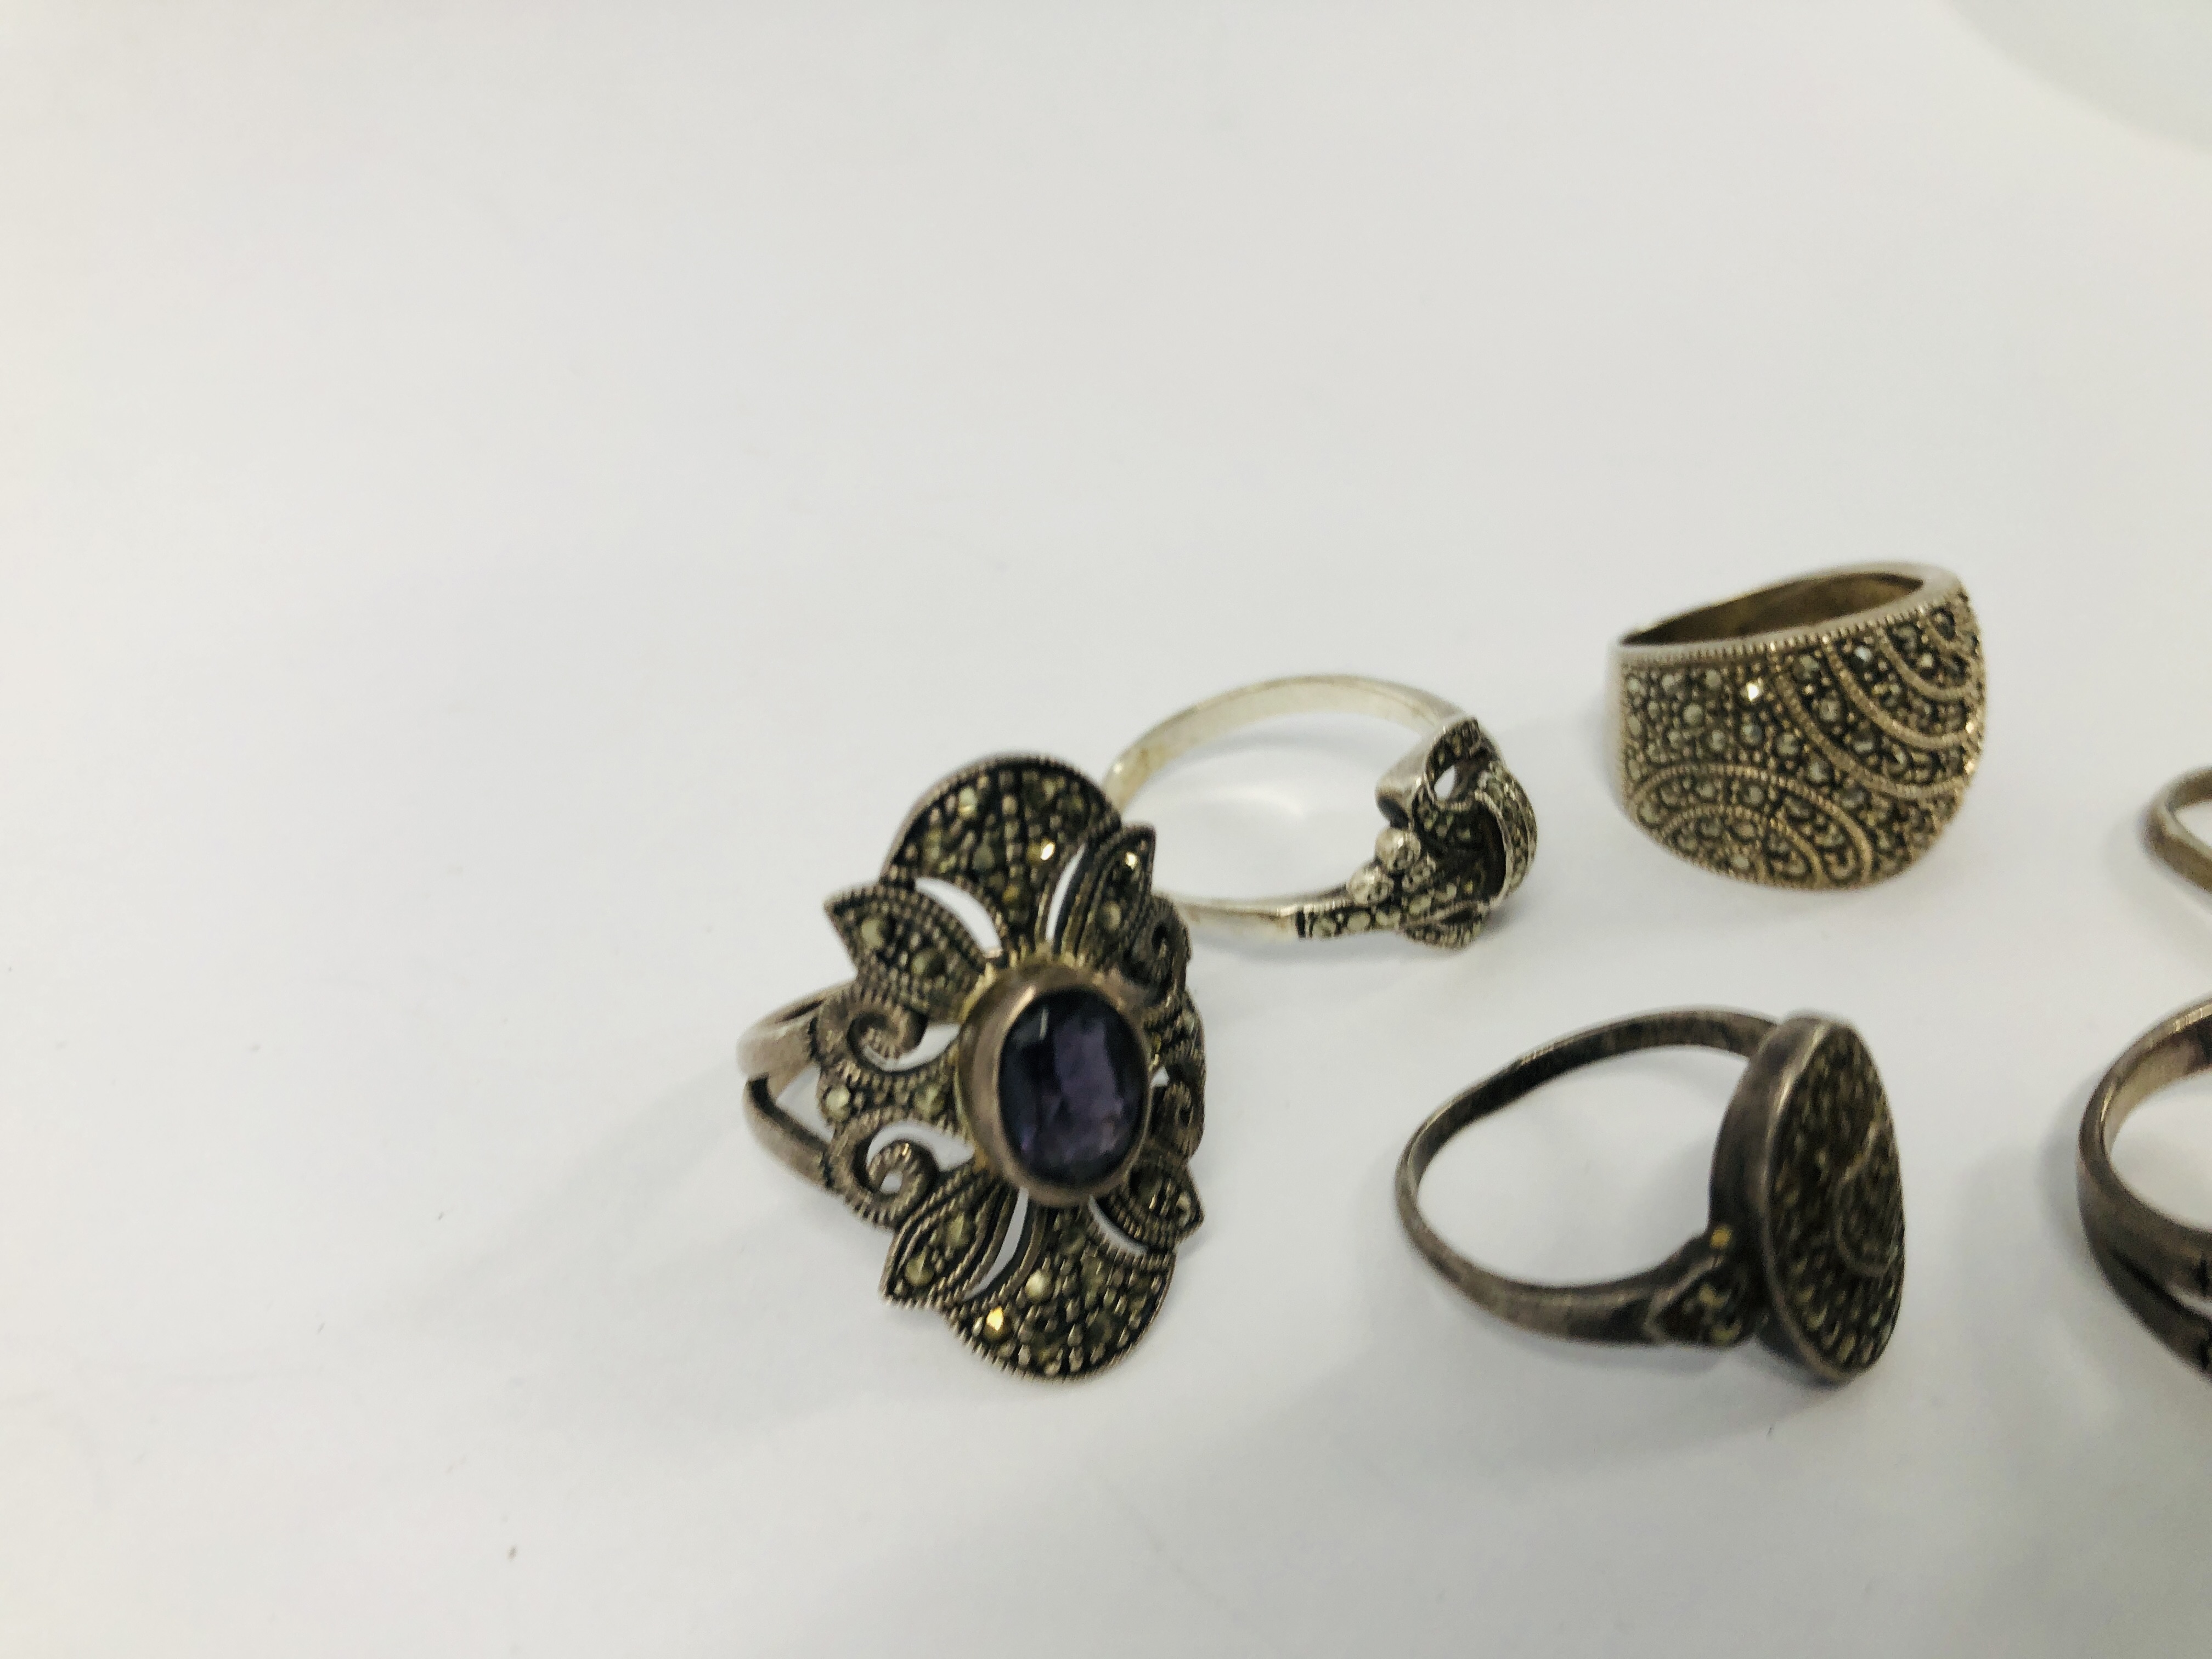 SIX ASSORTED VINTAGE SILVER MARCASITE RINGS - Image 4 of 7